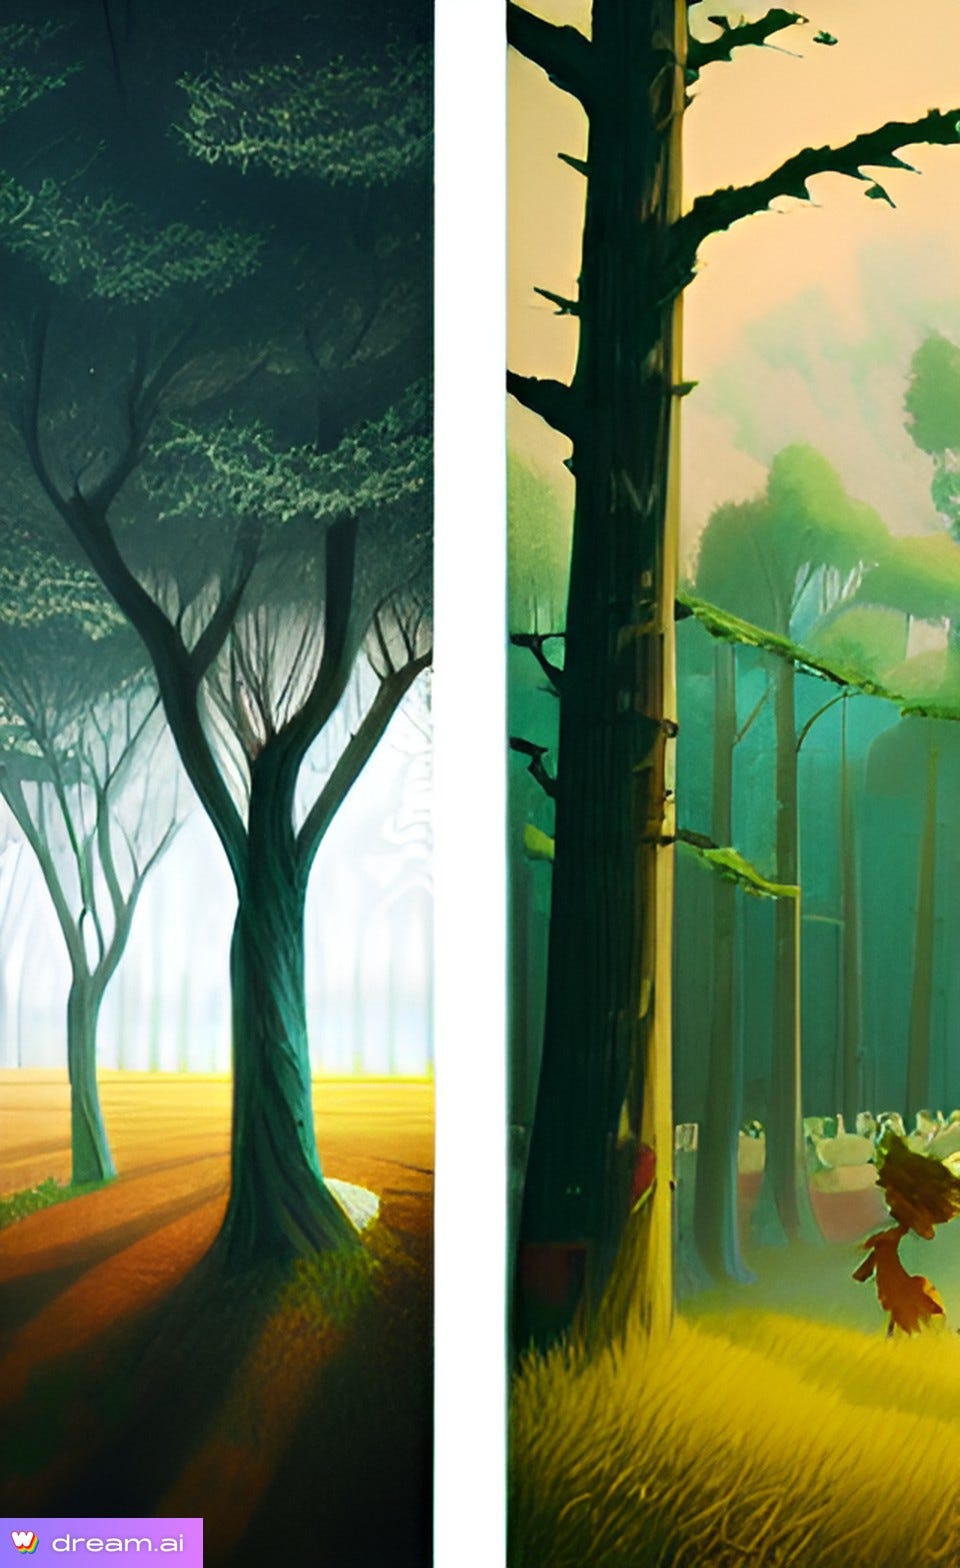 two comic-book-style panels showing trees, one with a figure resembling a small child underneath